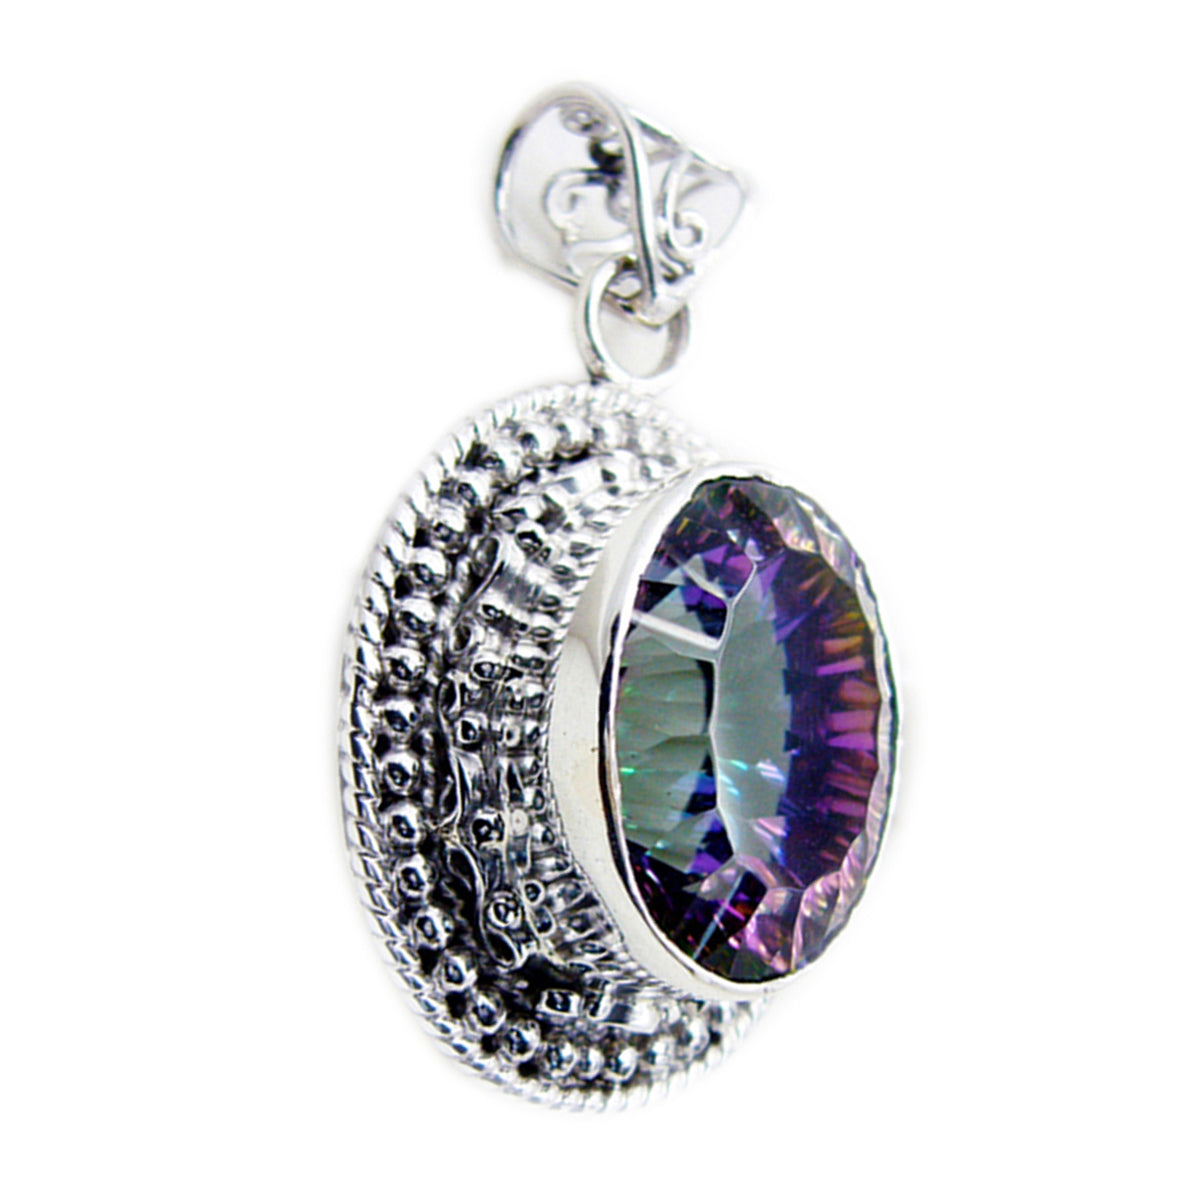 Riyo Graceful Gemstone Oval Faceted Multi Color Mystic Quartz Sterling Silver Pendant Gift For Christmas